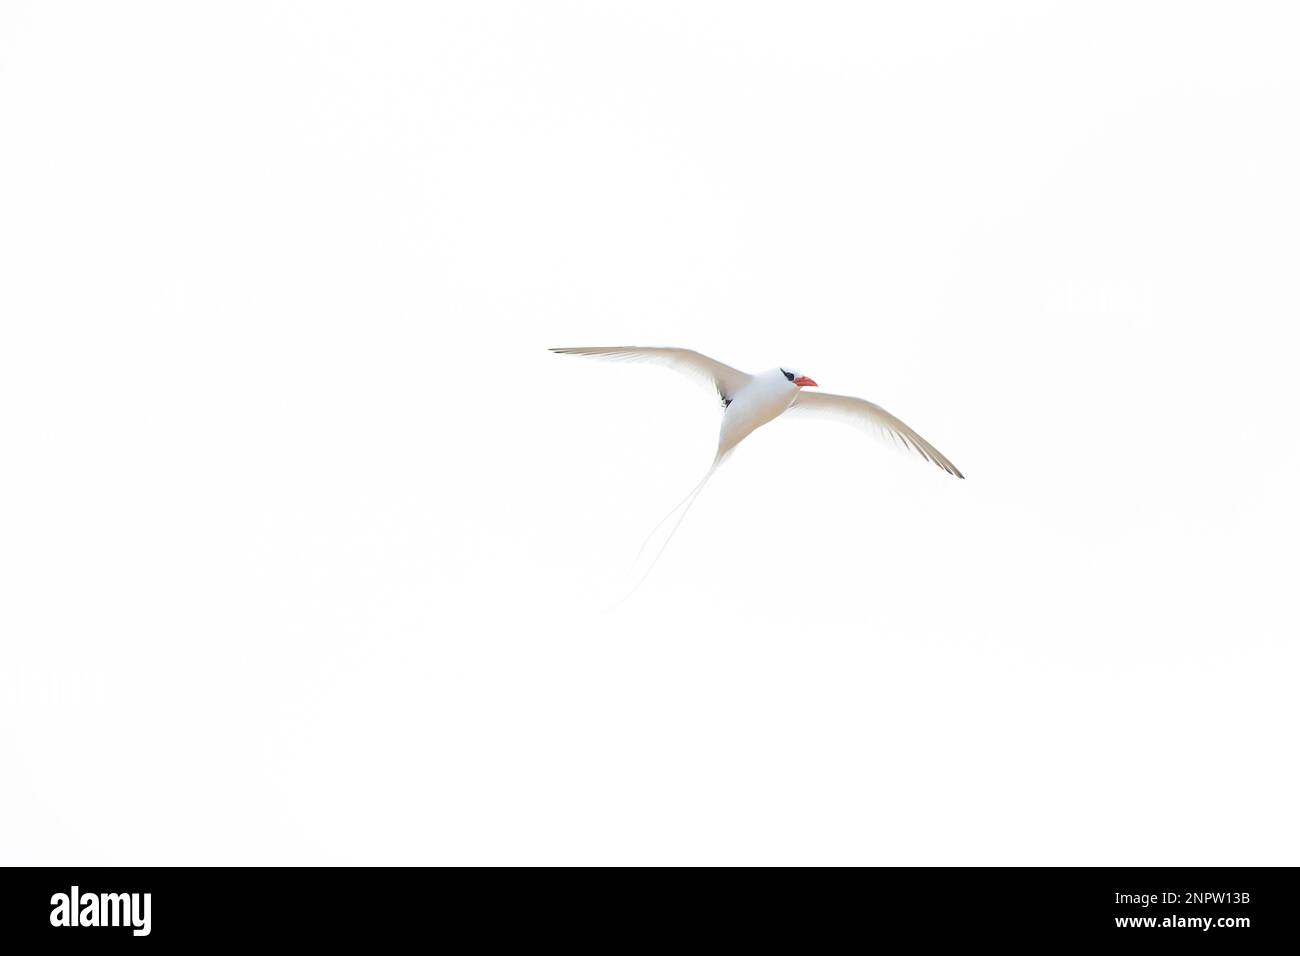 A red-billed tropicbird (Phaethon aethereus) in flight at the canary islands. Stock Photo